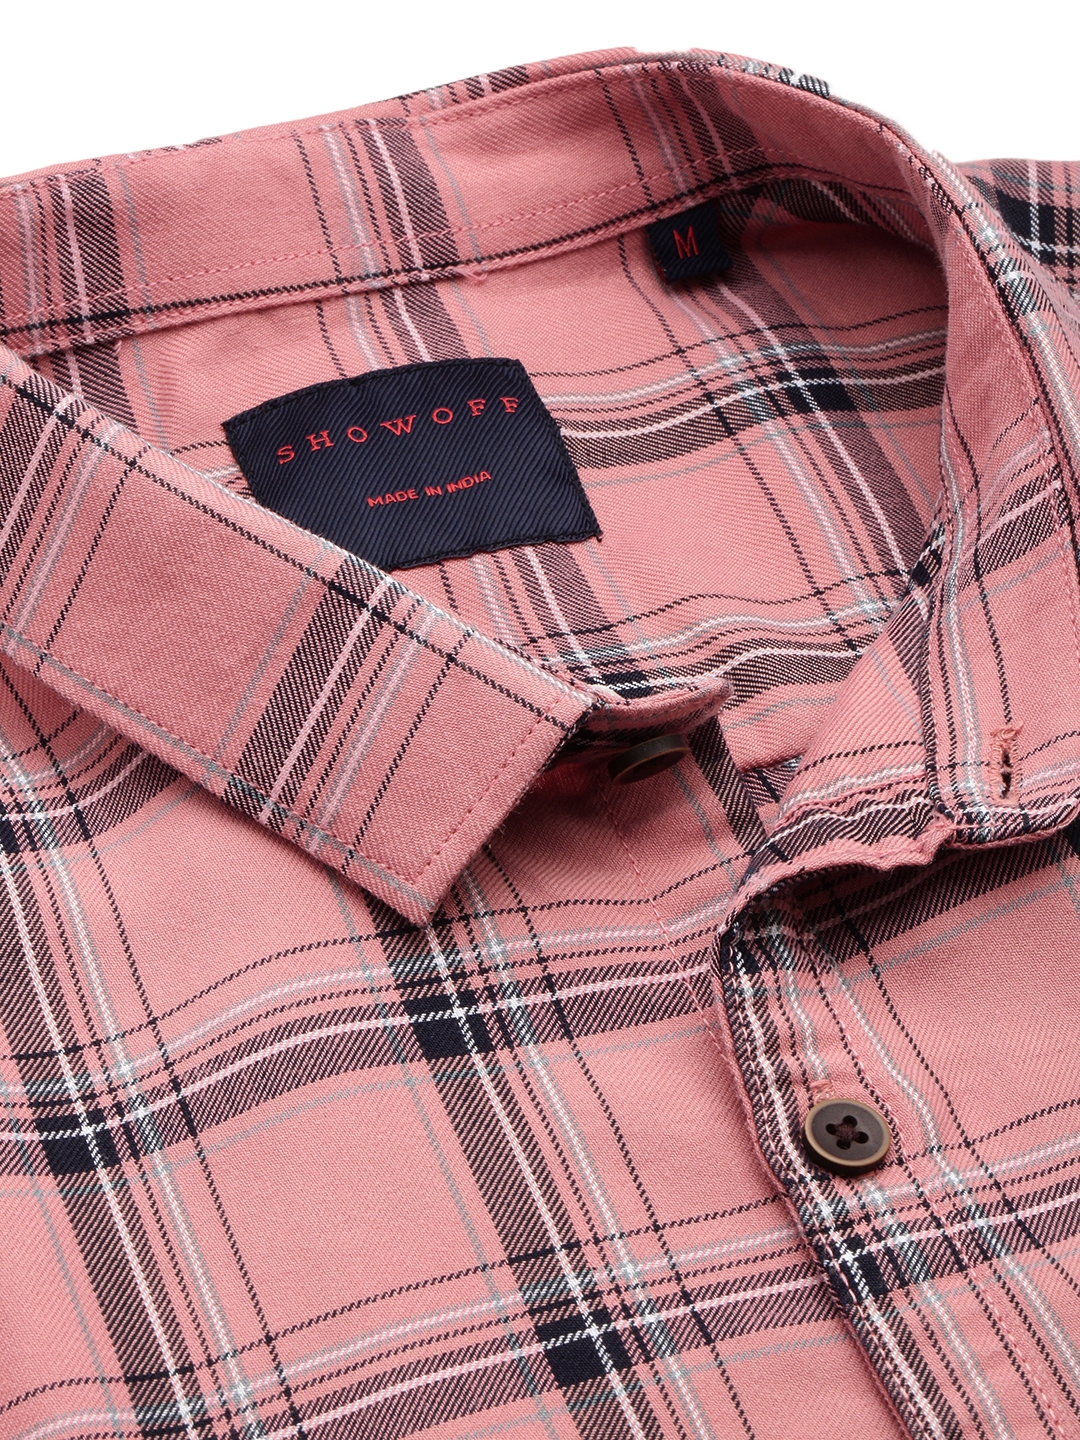 Showoff | SHOWOFF Men's Spread Collar Checked Pink Classic Shirt 5